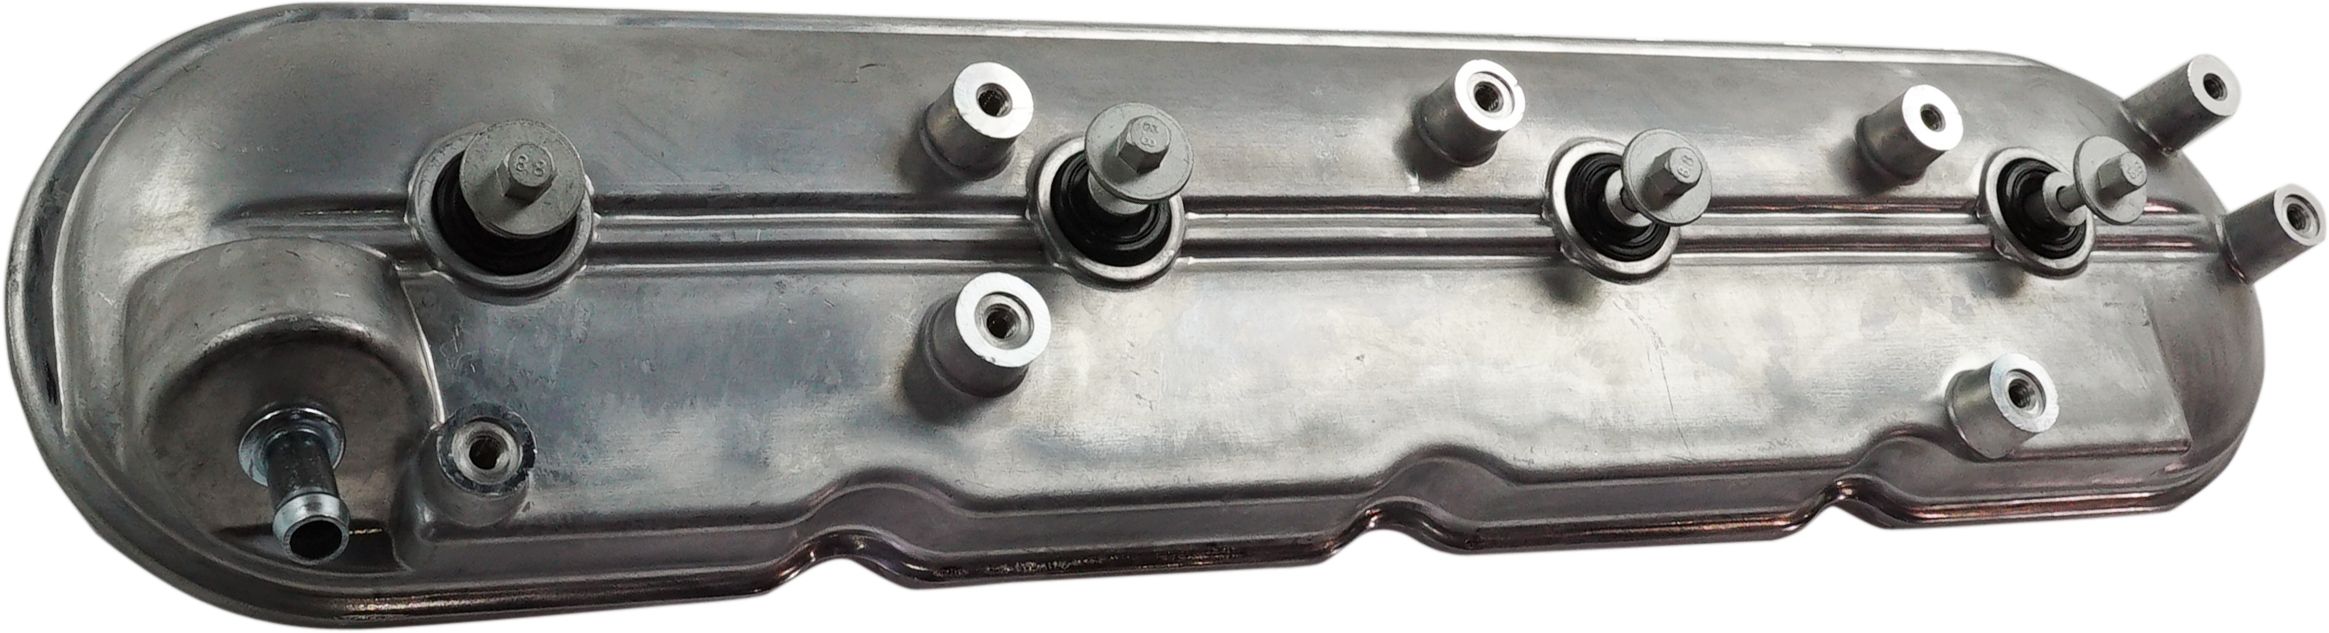 2005 - 2008 GMC Envoy Valve Cover - Driver Side 8 Cyl 5.3L Replacement  RC32040008)